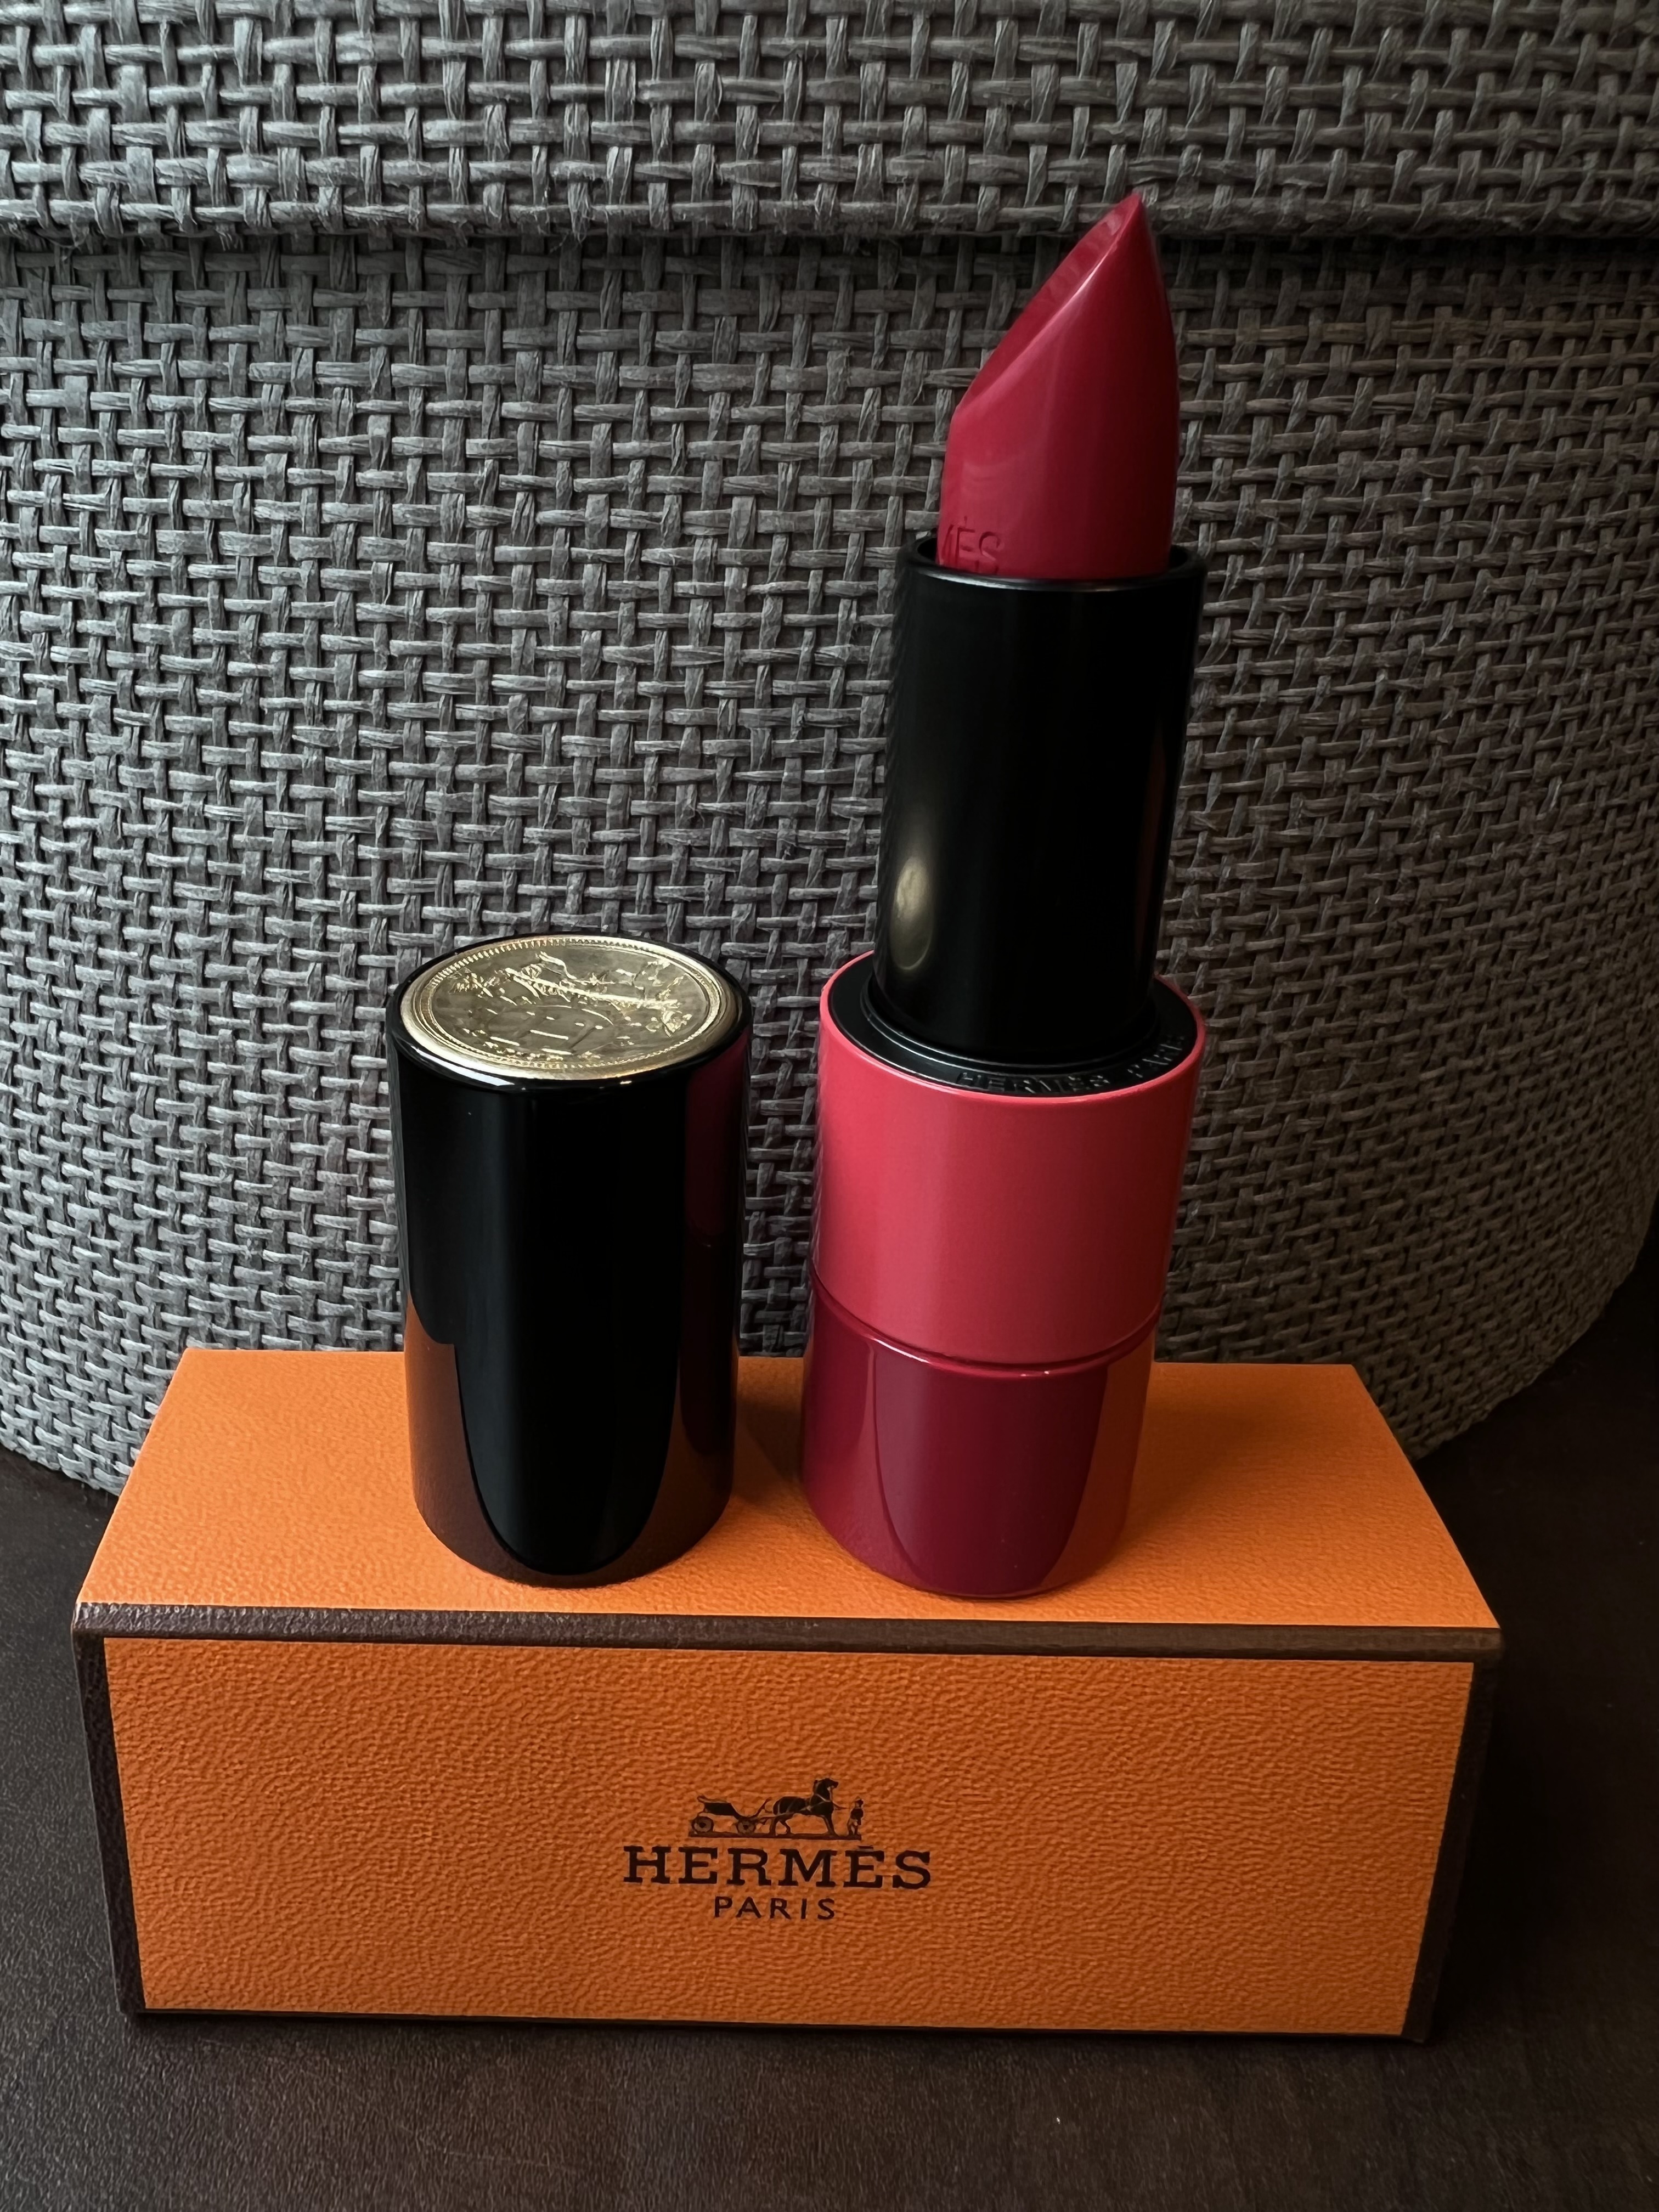 Satin Lipstick in the color Rouge Grenade. Photo via @The_Notorious_Pink.